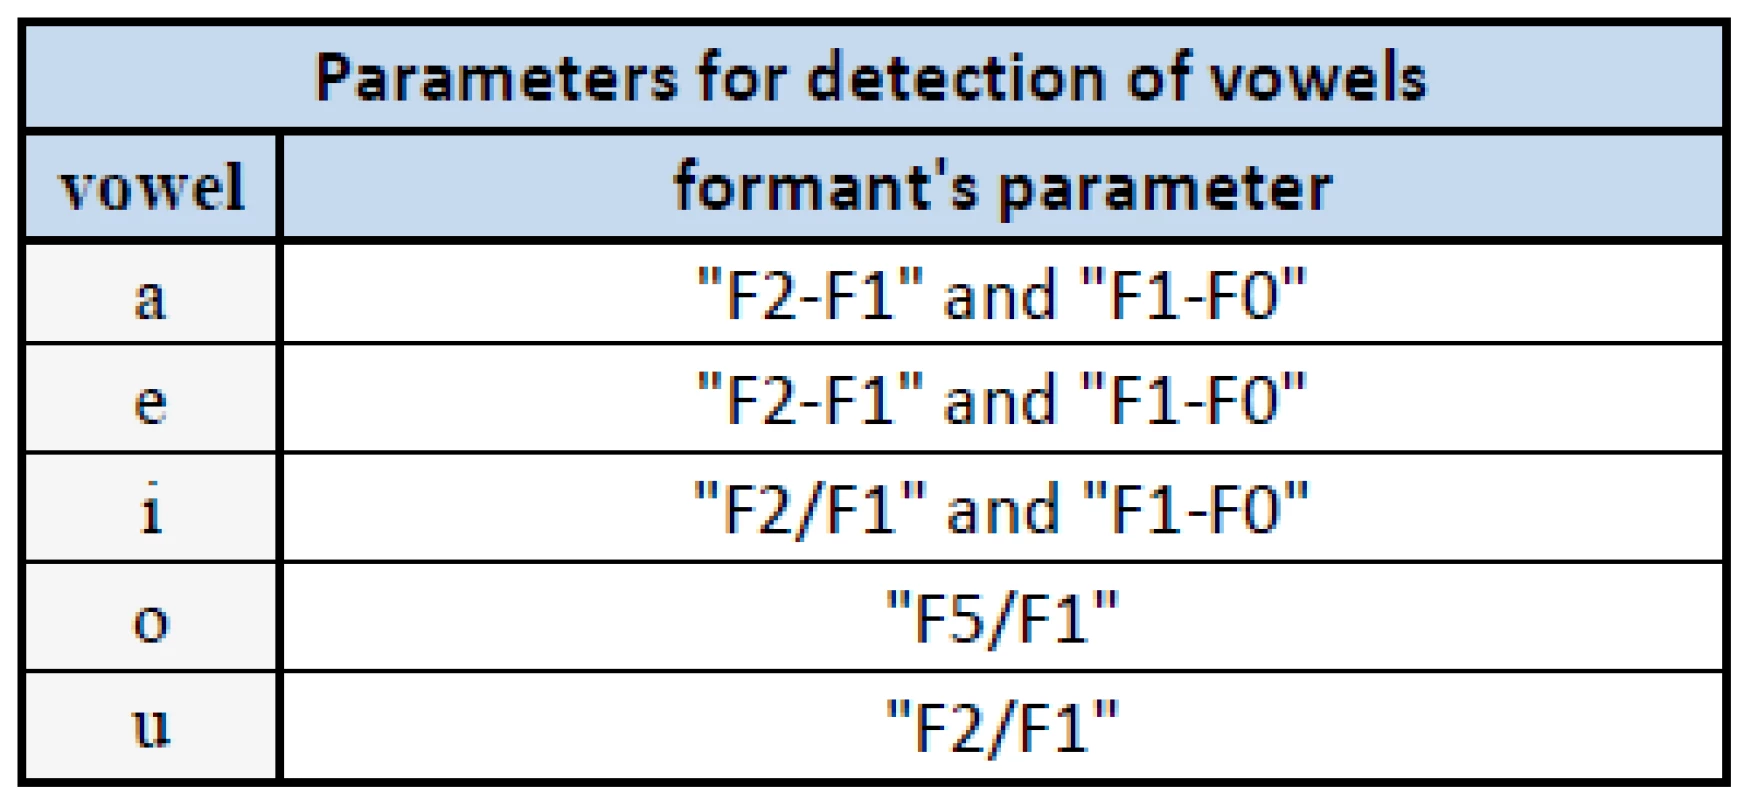 Parameters for detection of vowels.